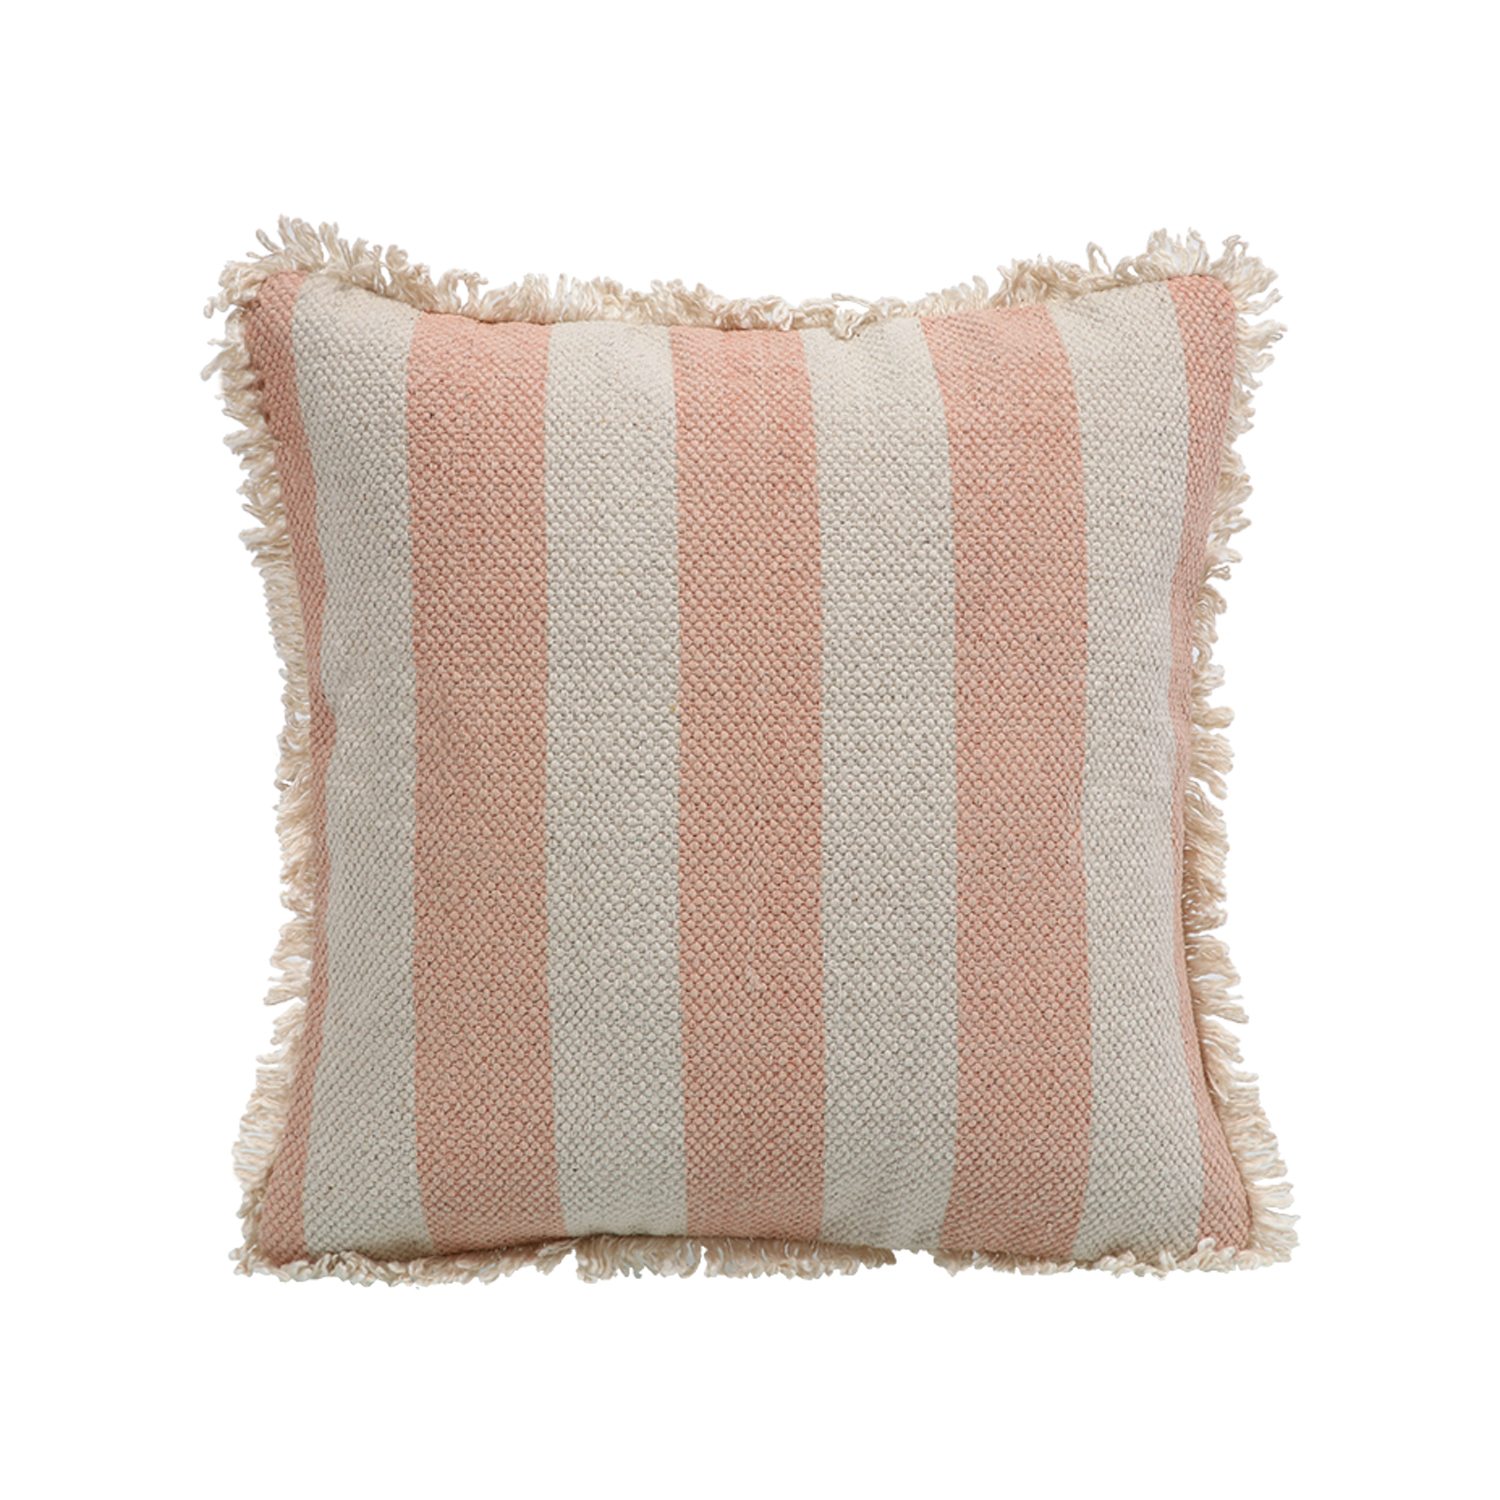 Printed Stripe Pink Cushions Covers with fringes 16X16 Inch